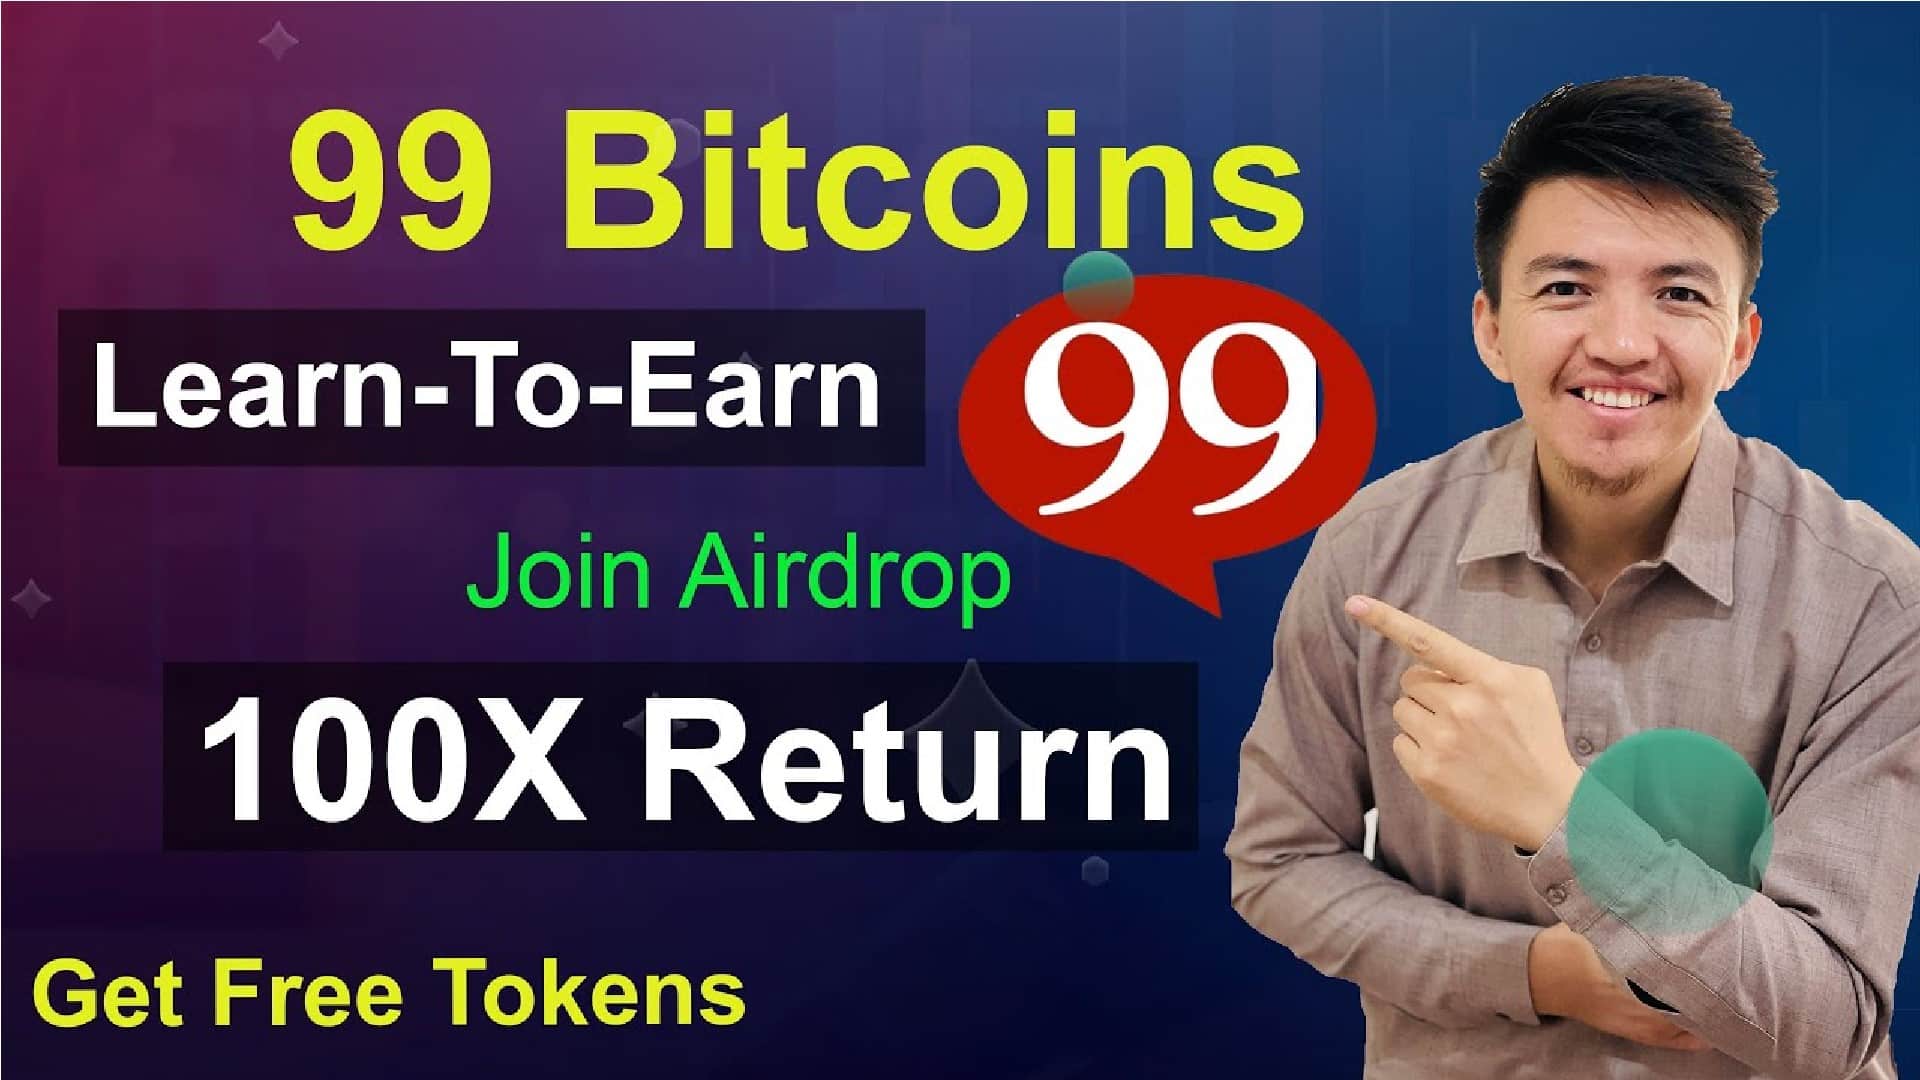 Crypto YouTuber Crypto Boy Reviews a New Learn-to-Earn Crypto Presale with Potential of Up to 100x Gains